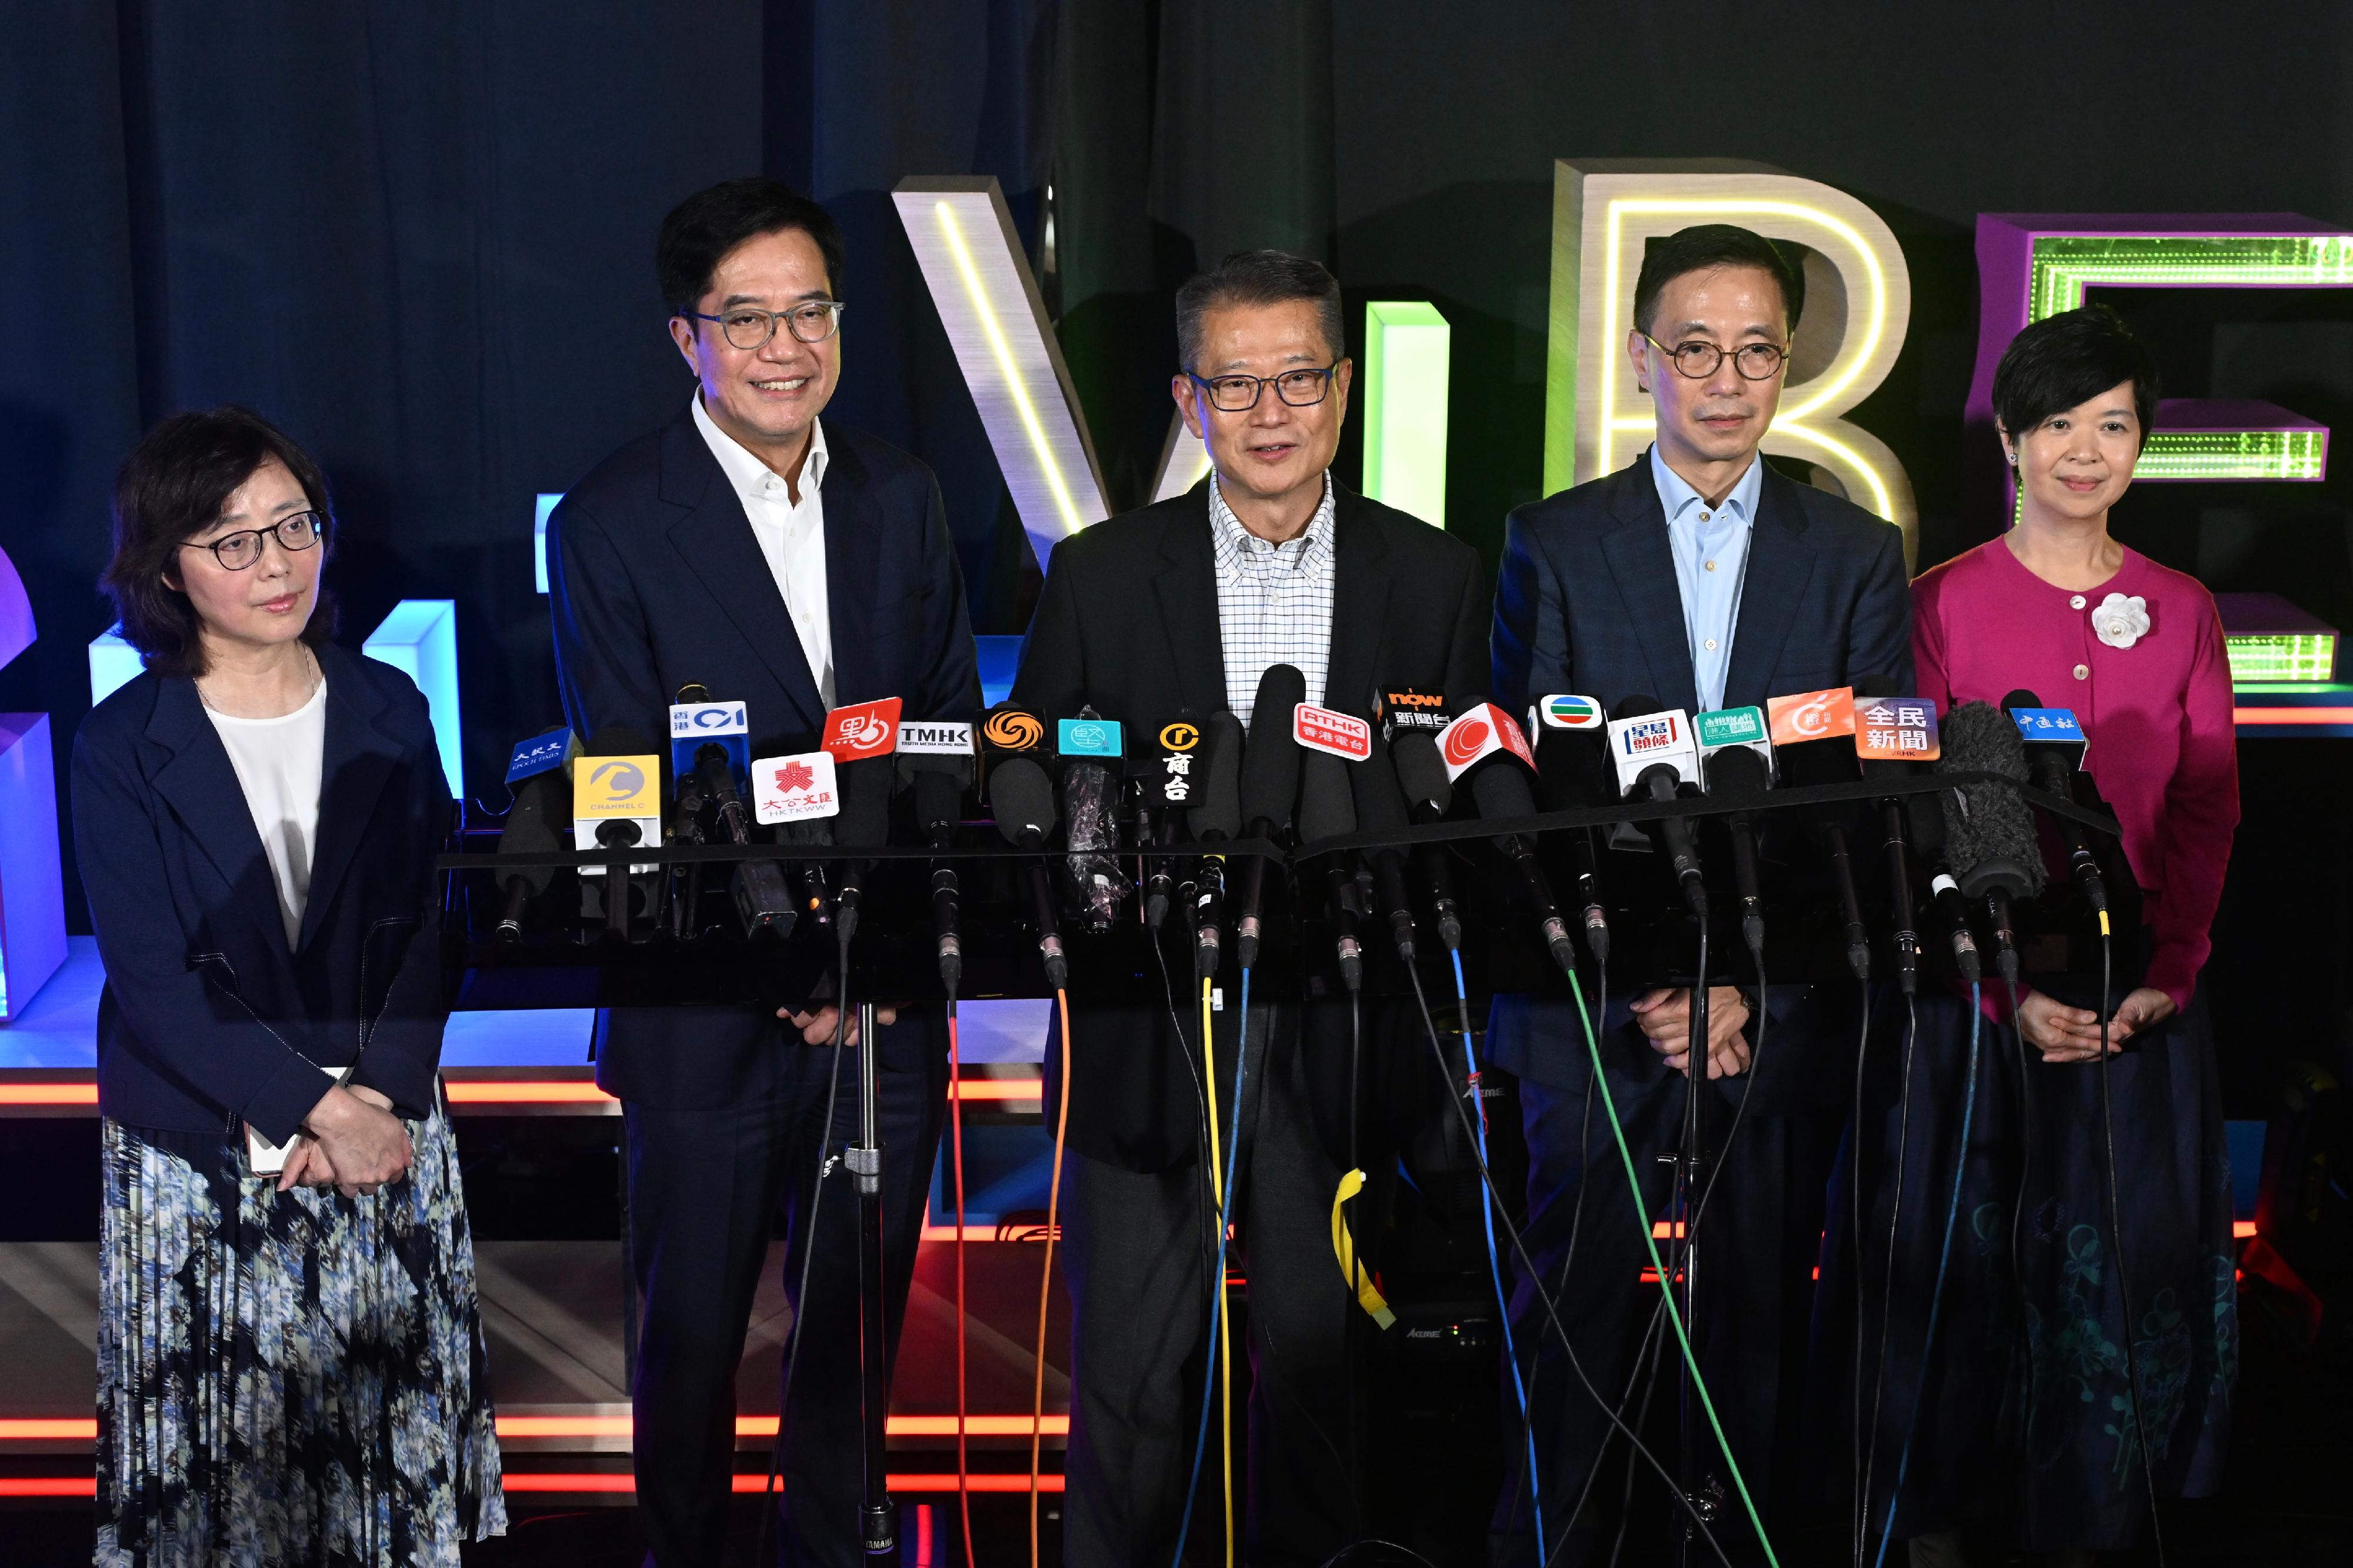 The Financial Secretary, Mr Paul Chan (centre), together with the Deputy Financial Secretary, Mr Michael Wong (second left); the Secretary for Culture, Sports and Tourism, Mr Kevin Yeung (second right); the Secretary for Development, Ms Bernadette Linn (first left); and the Secretary for Housing, Ms Winnie Ho (first right), meet the media after hosting the "Night Vibes Hong Kong" Campaign Launch Ceremony this evening (September 14).